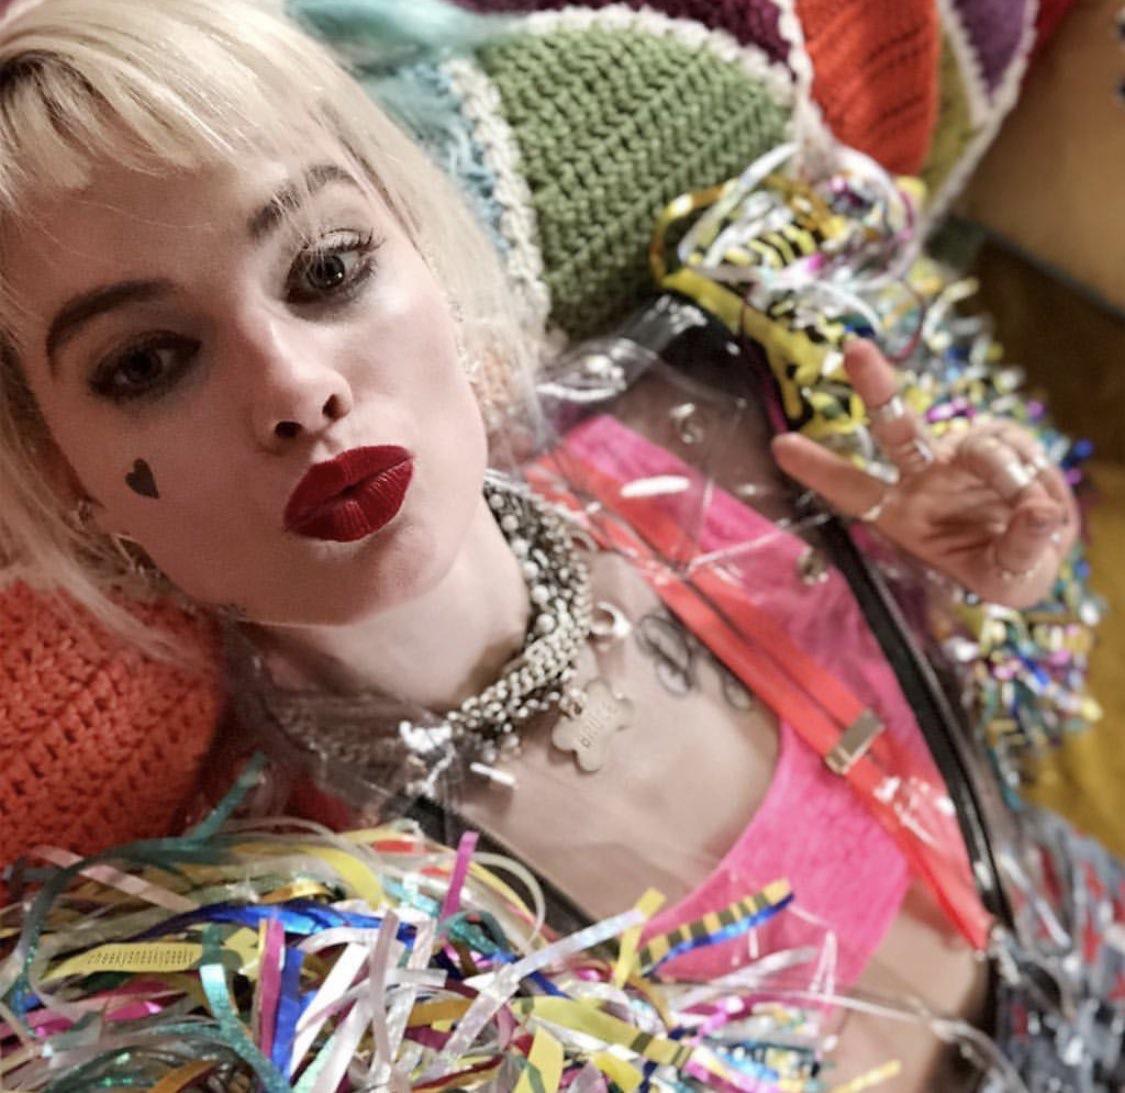 First Look: 'Birds of Prey' movie teaser features Harley Quinn and the gang